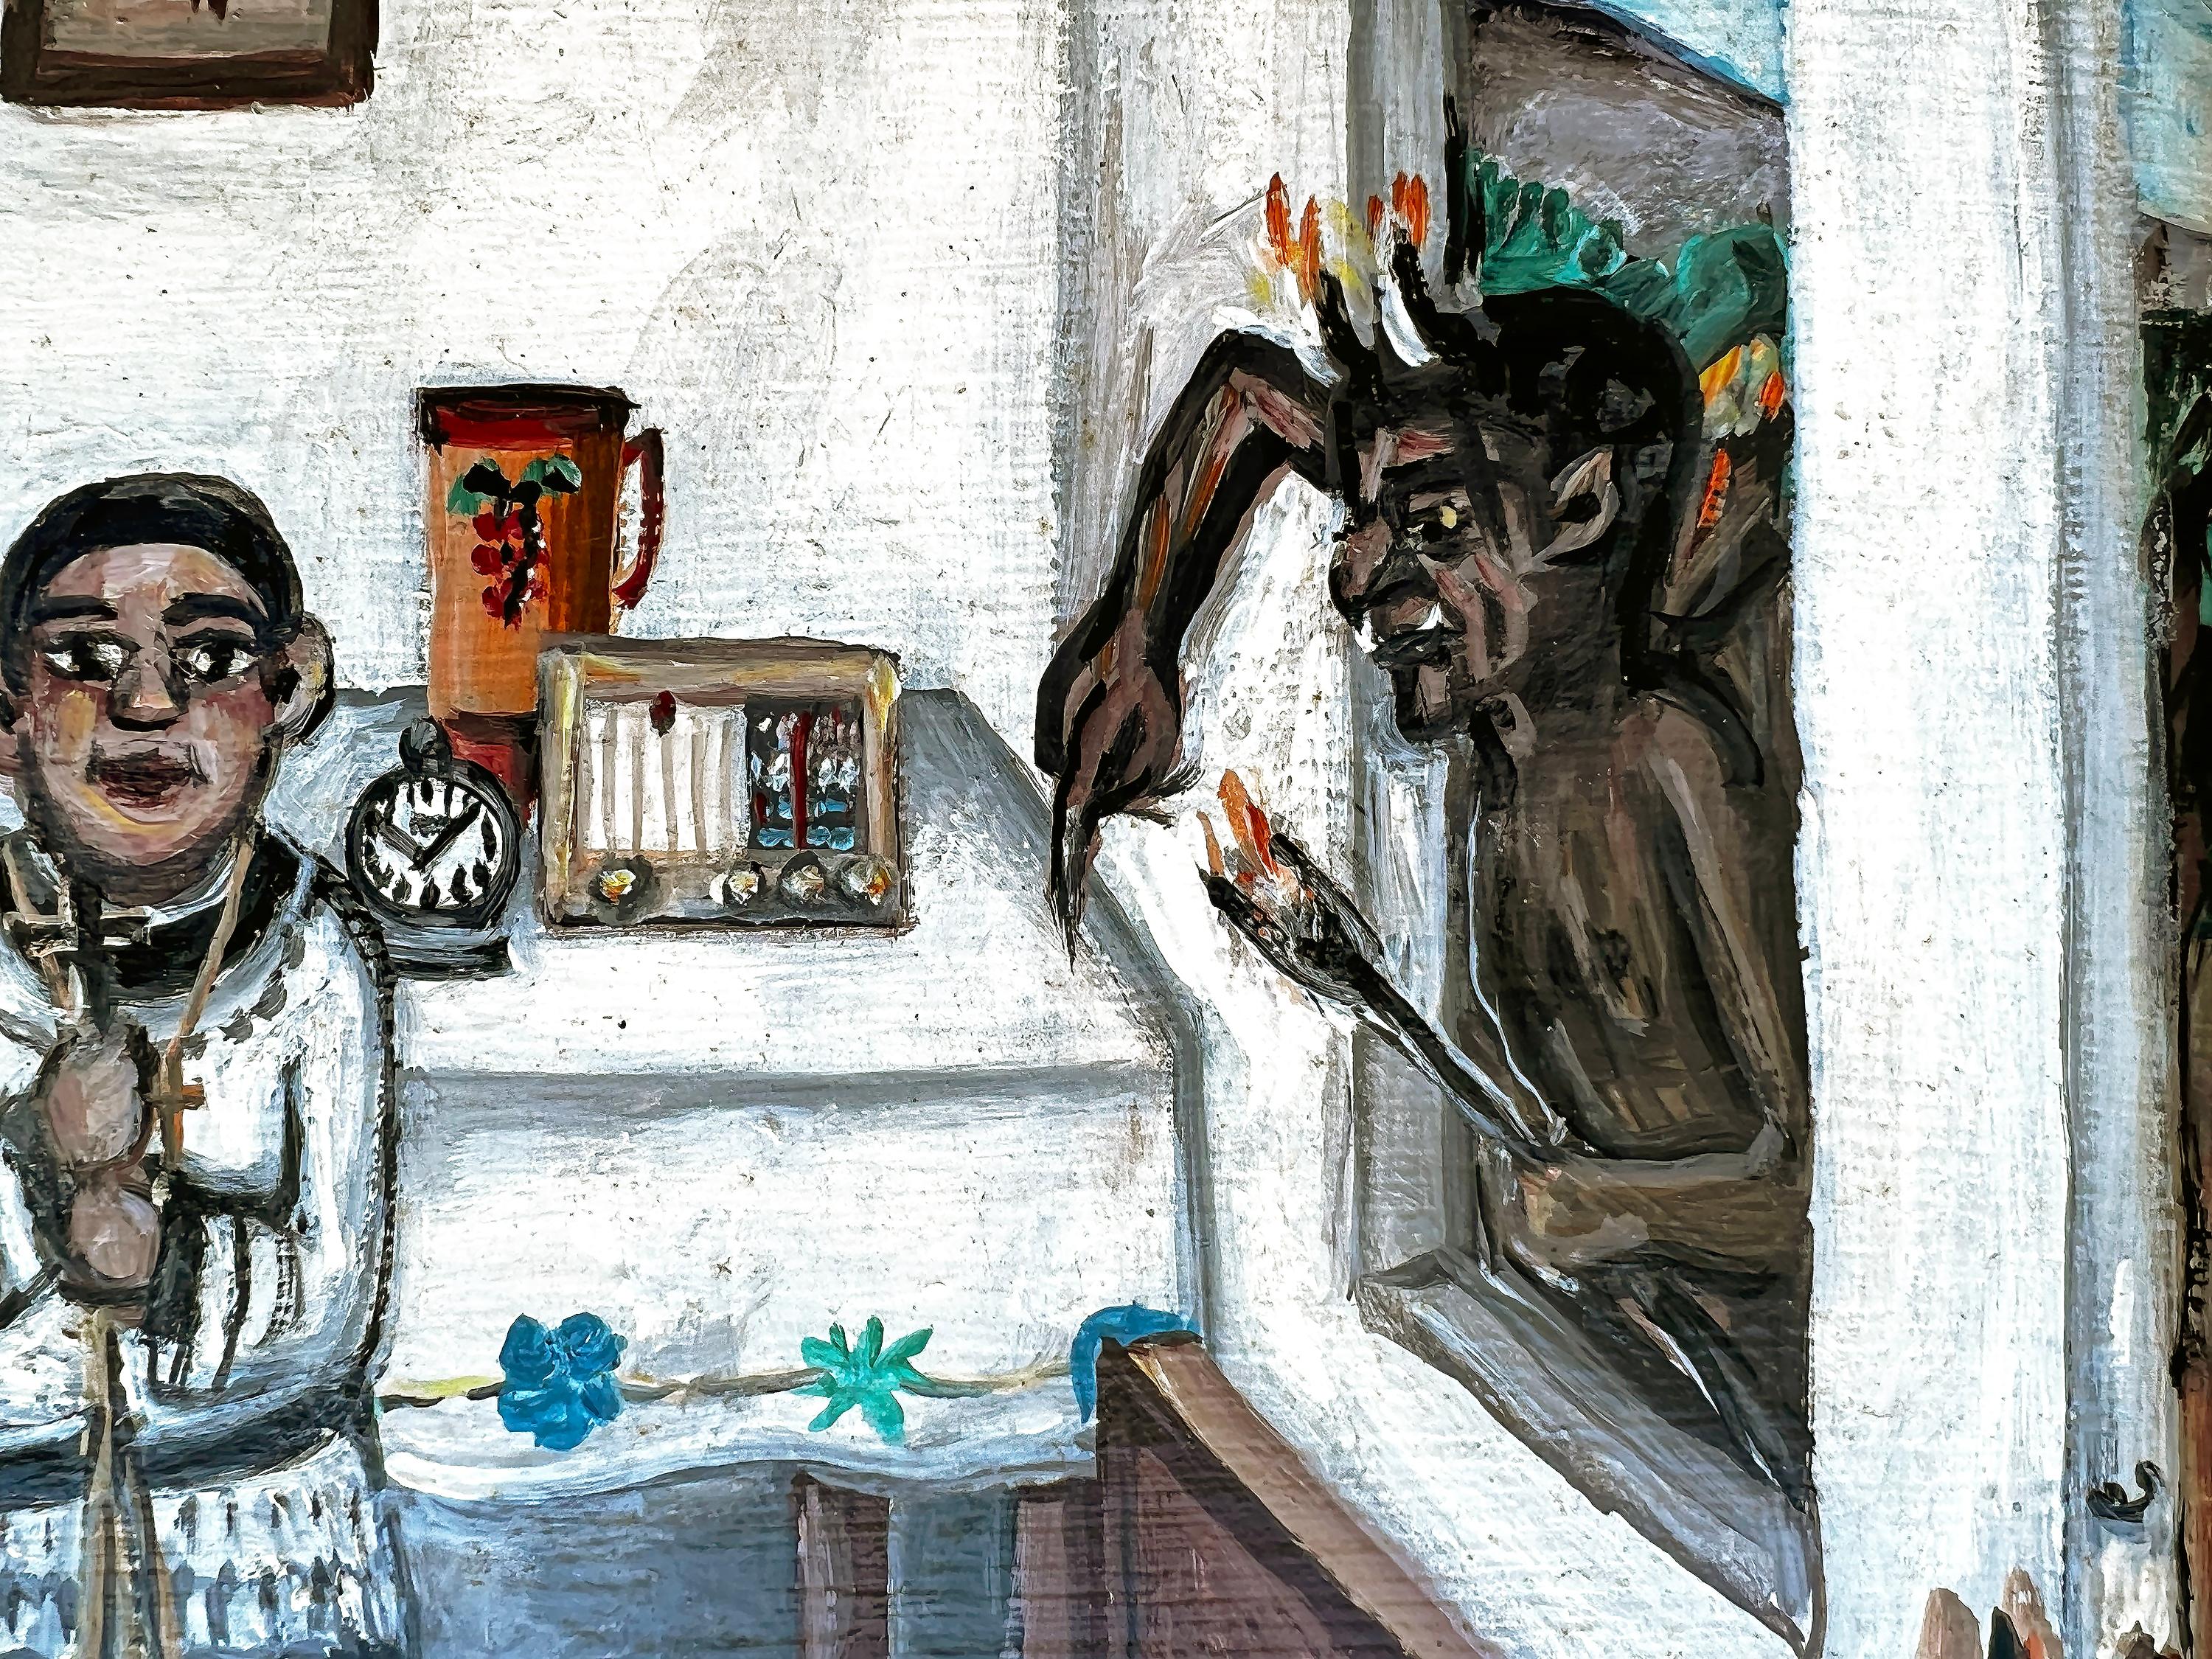 Devils depicted. Artist Wilson Bigaud paints a graphic narrative of mid-century life in Haiti without modern medicine. A man is dying yet there is no doctor present.  In the struggle between good and evil, a life lies in the balance.  It is unclear